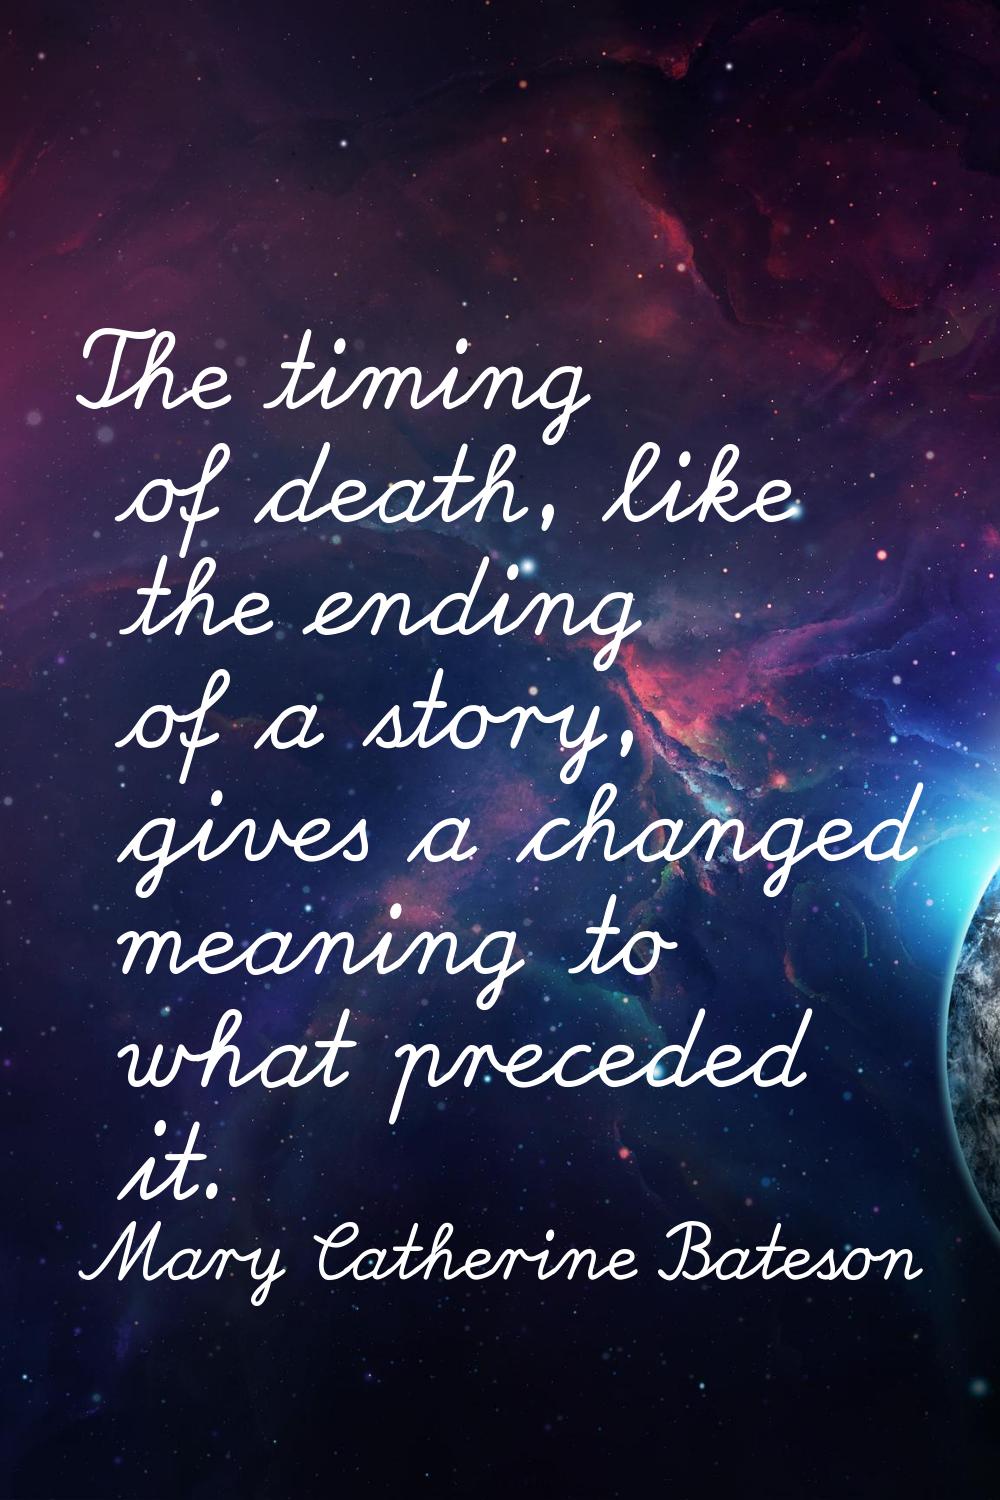 The timing of death, like the ending of a story, gives a changed meaning to what preceded it.